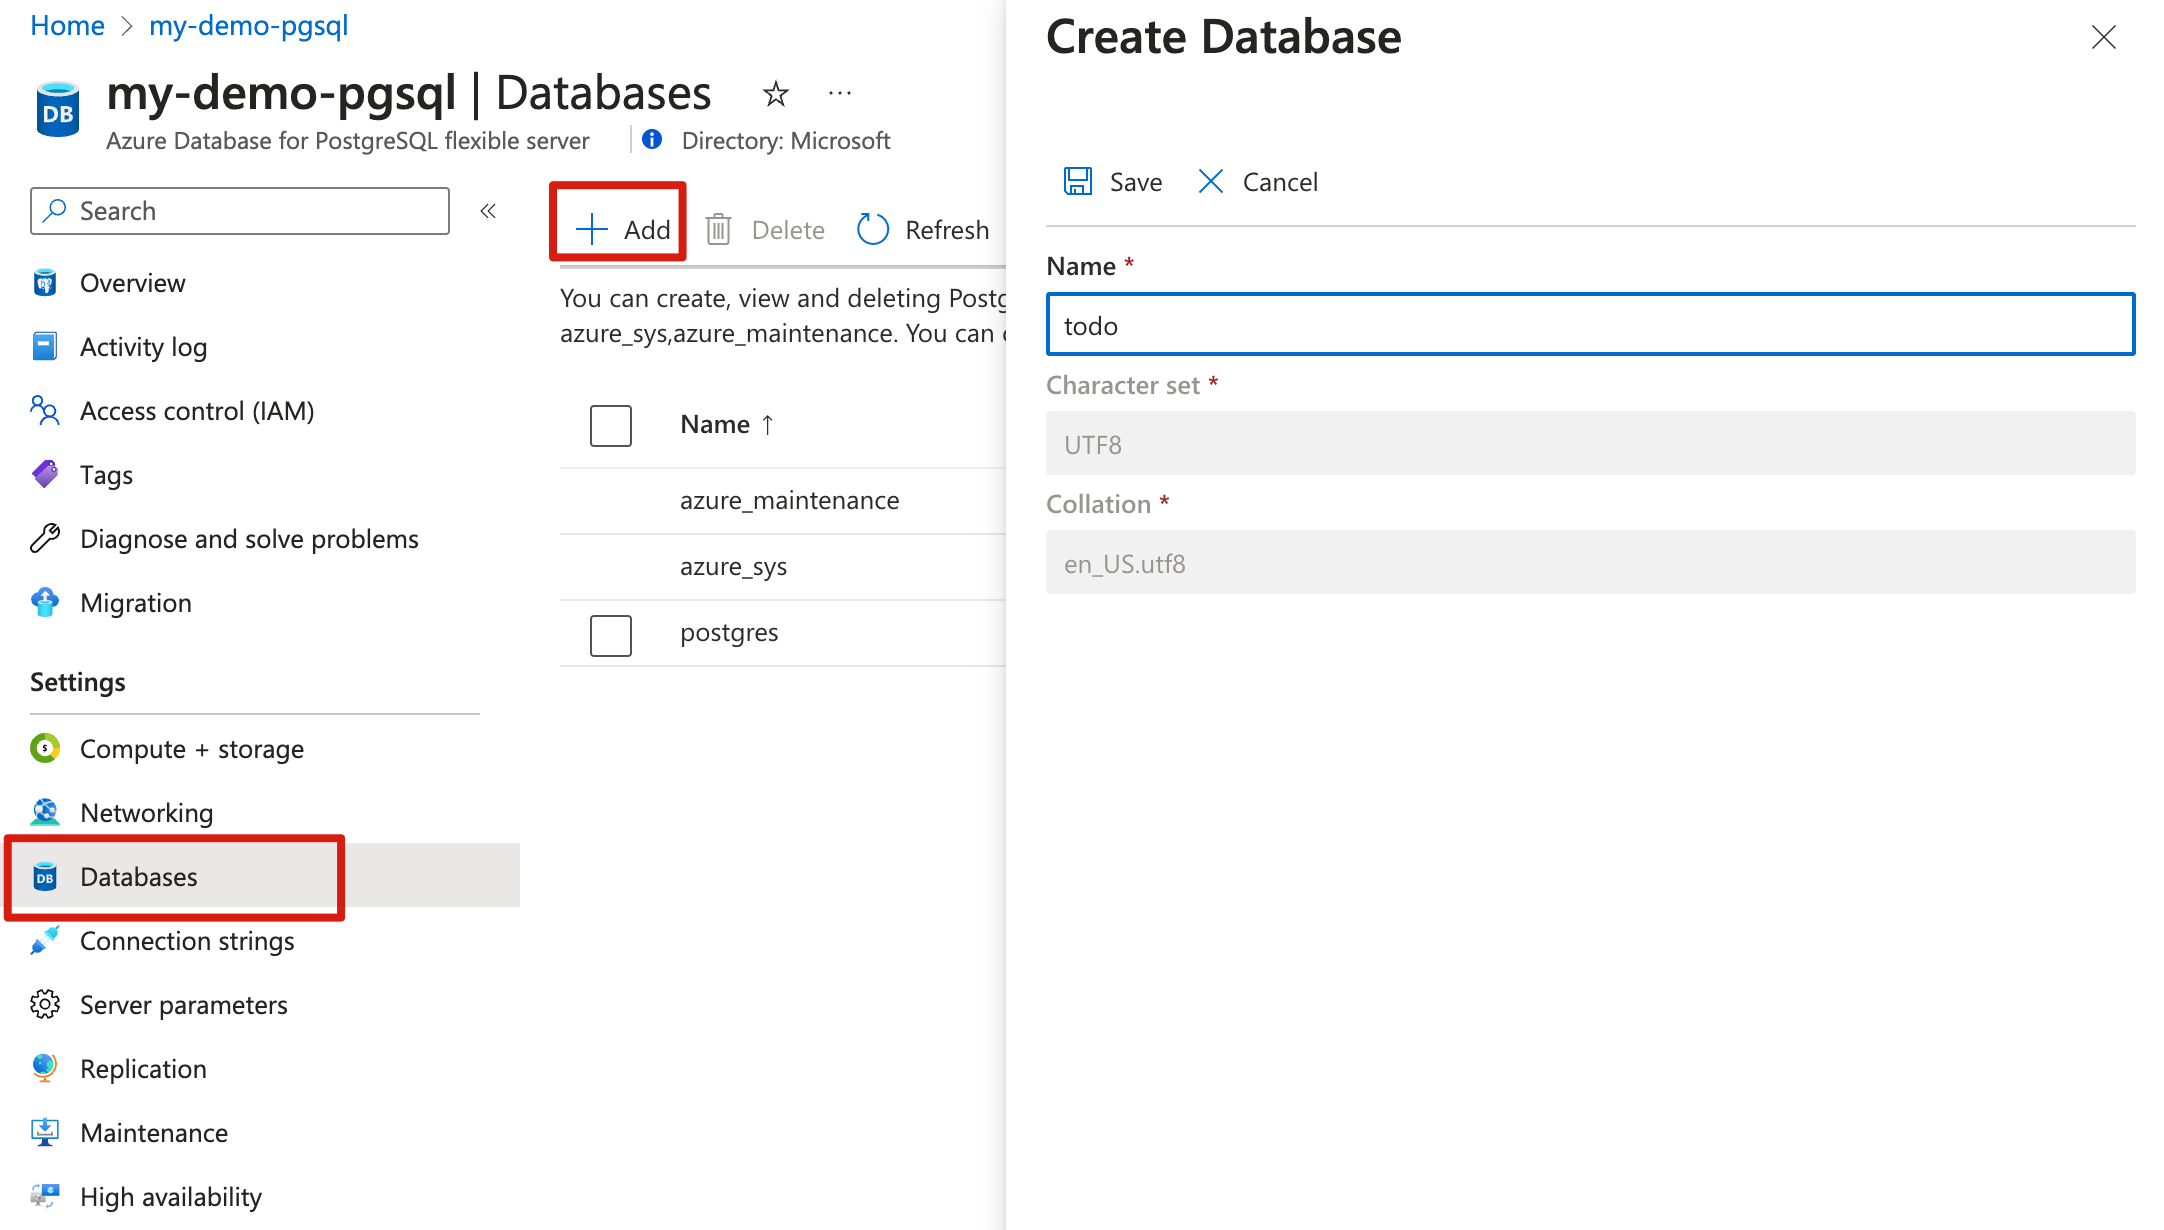 Screenshot of the Azure portal that shows the Databases page with the Create Database pane open.